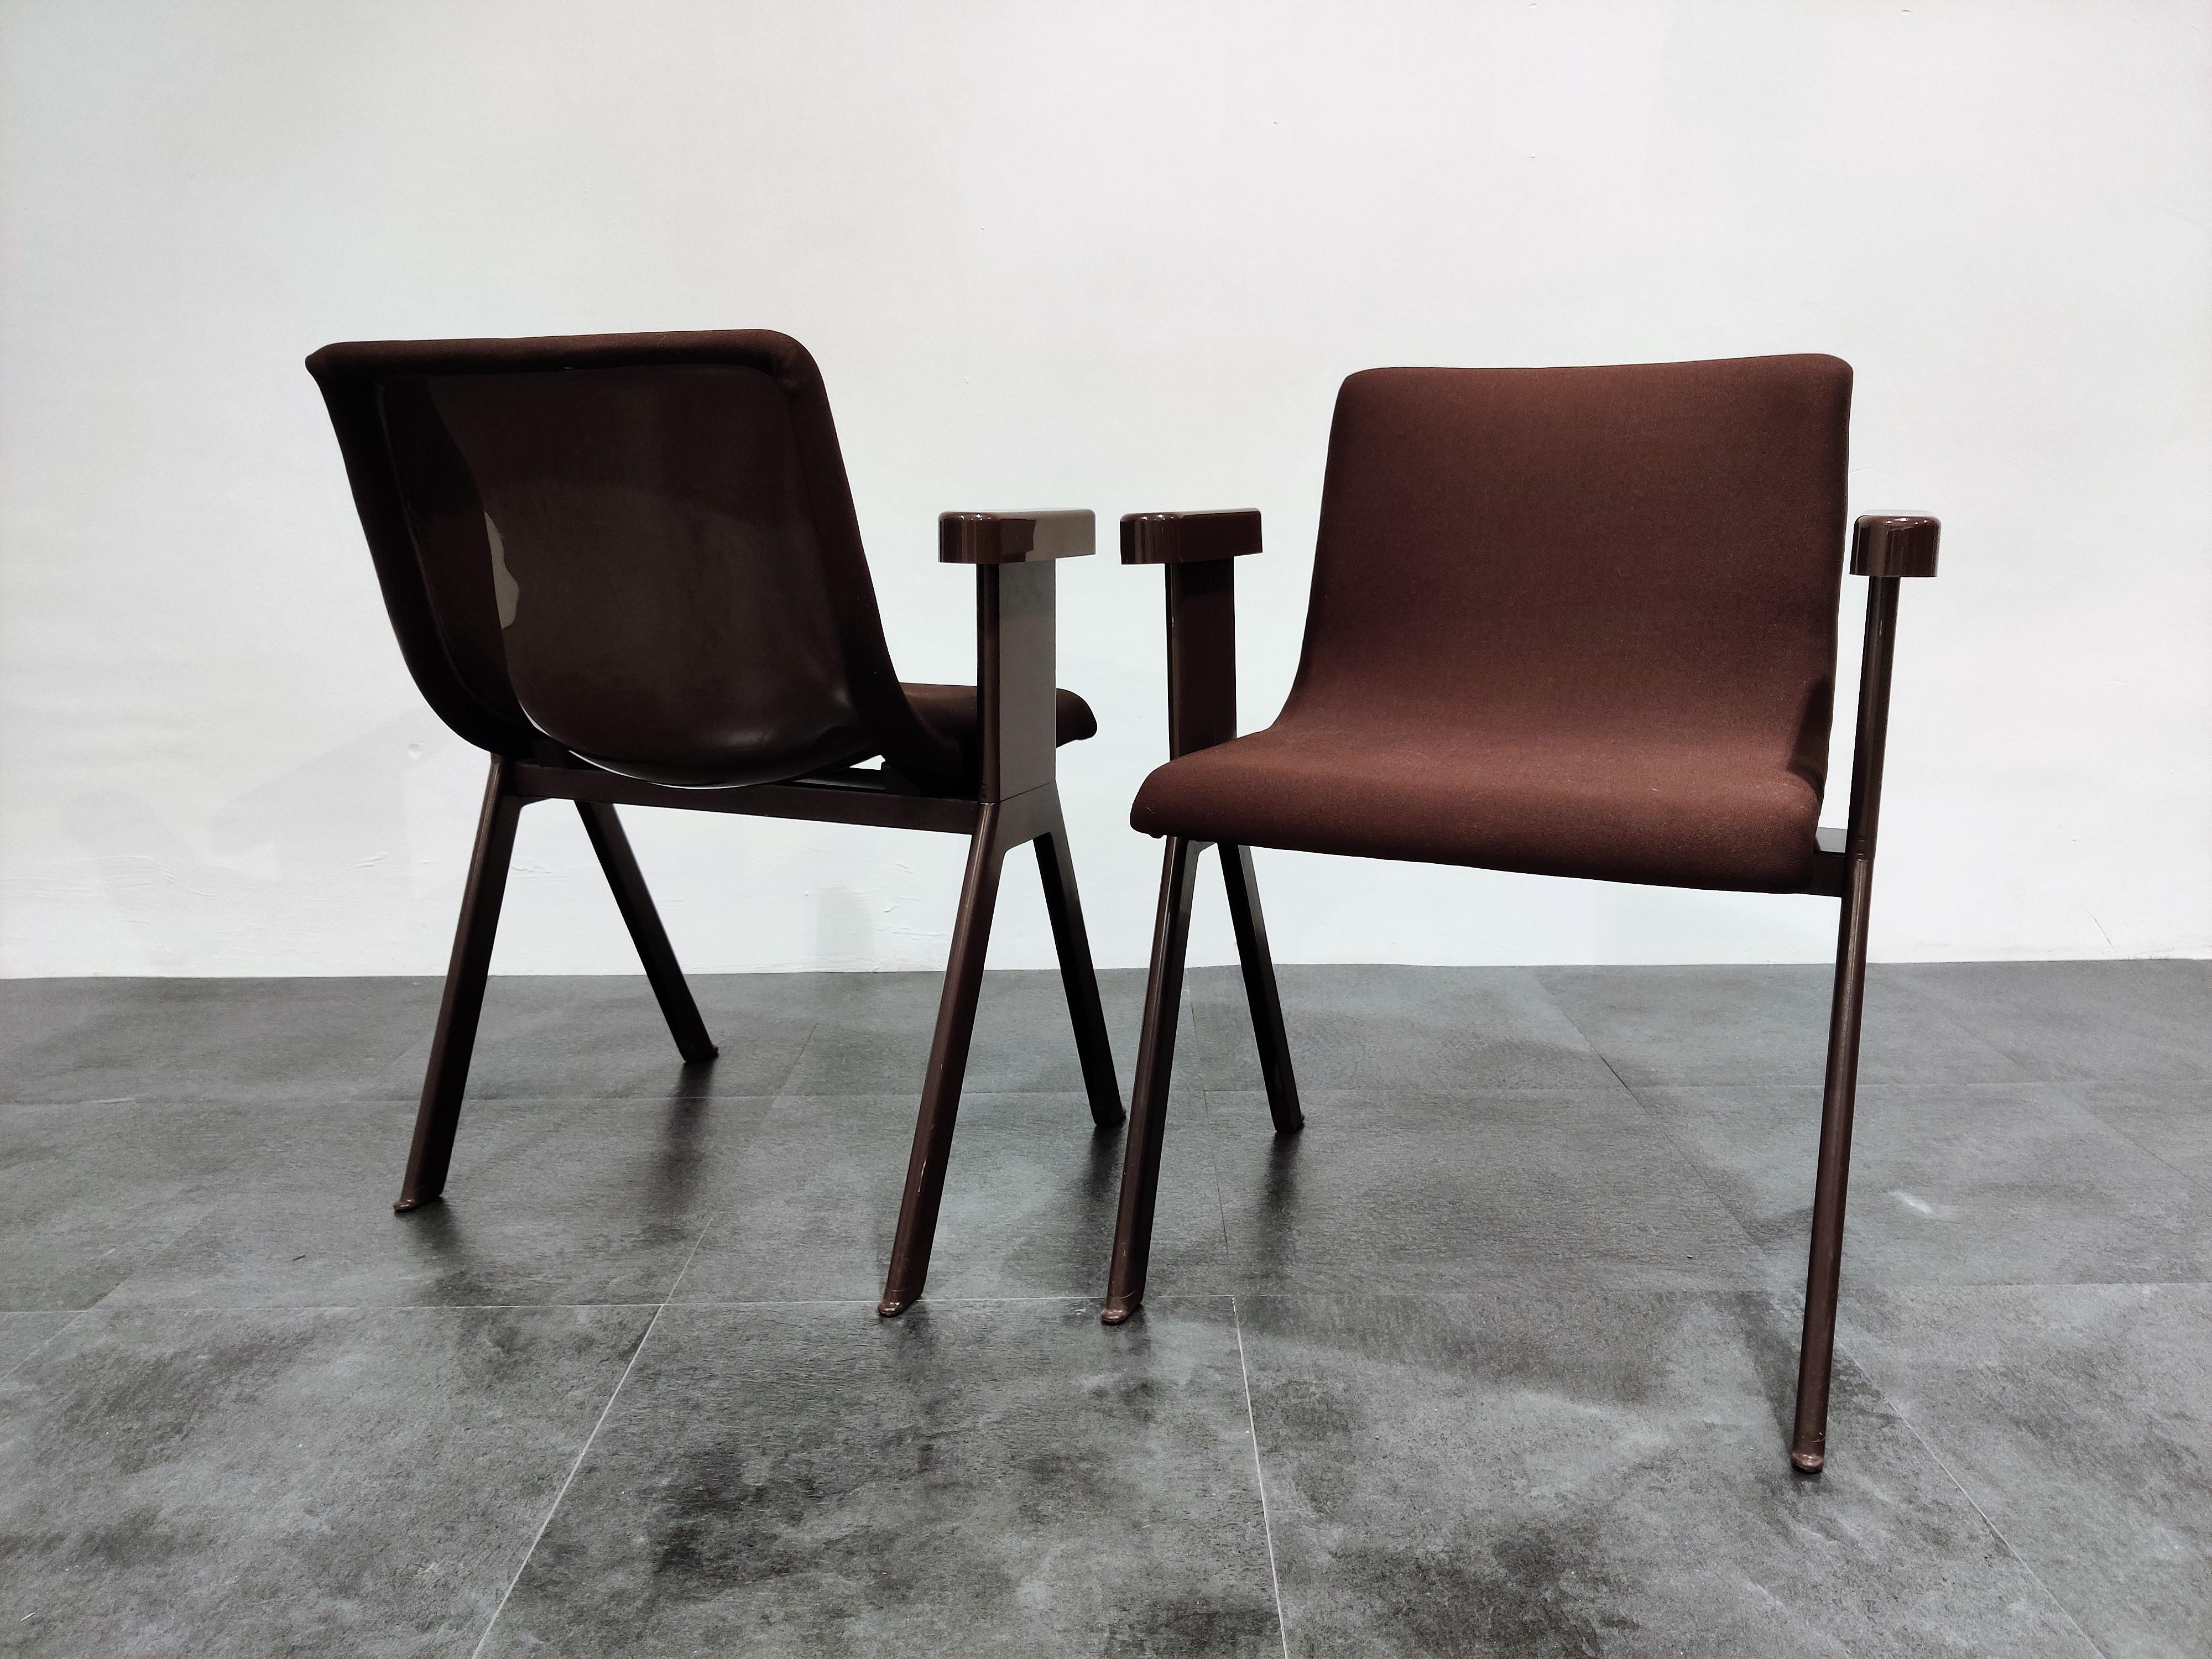 Late 20th Century Midcentury Armchairs by Ettore Sottsass for Olivetti, 1970s For Sale